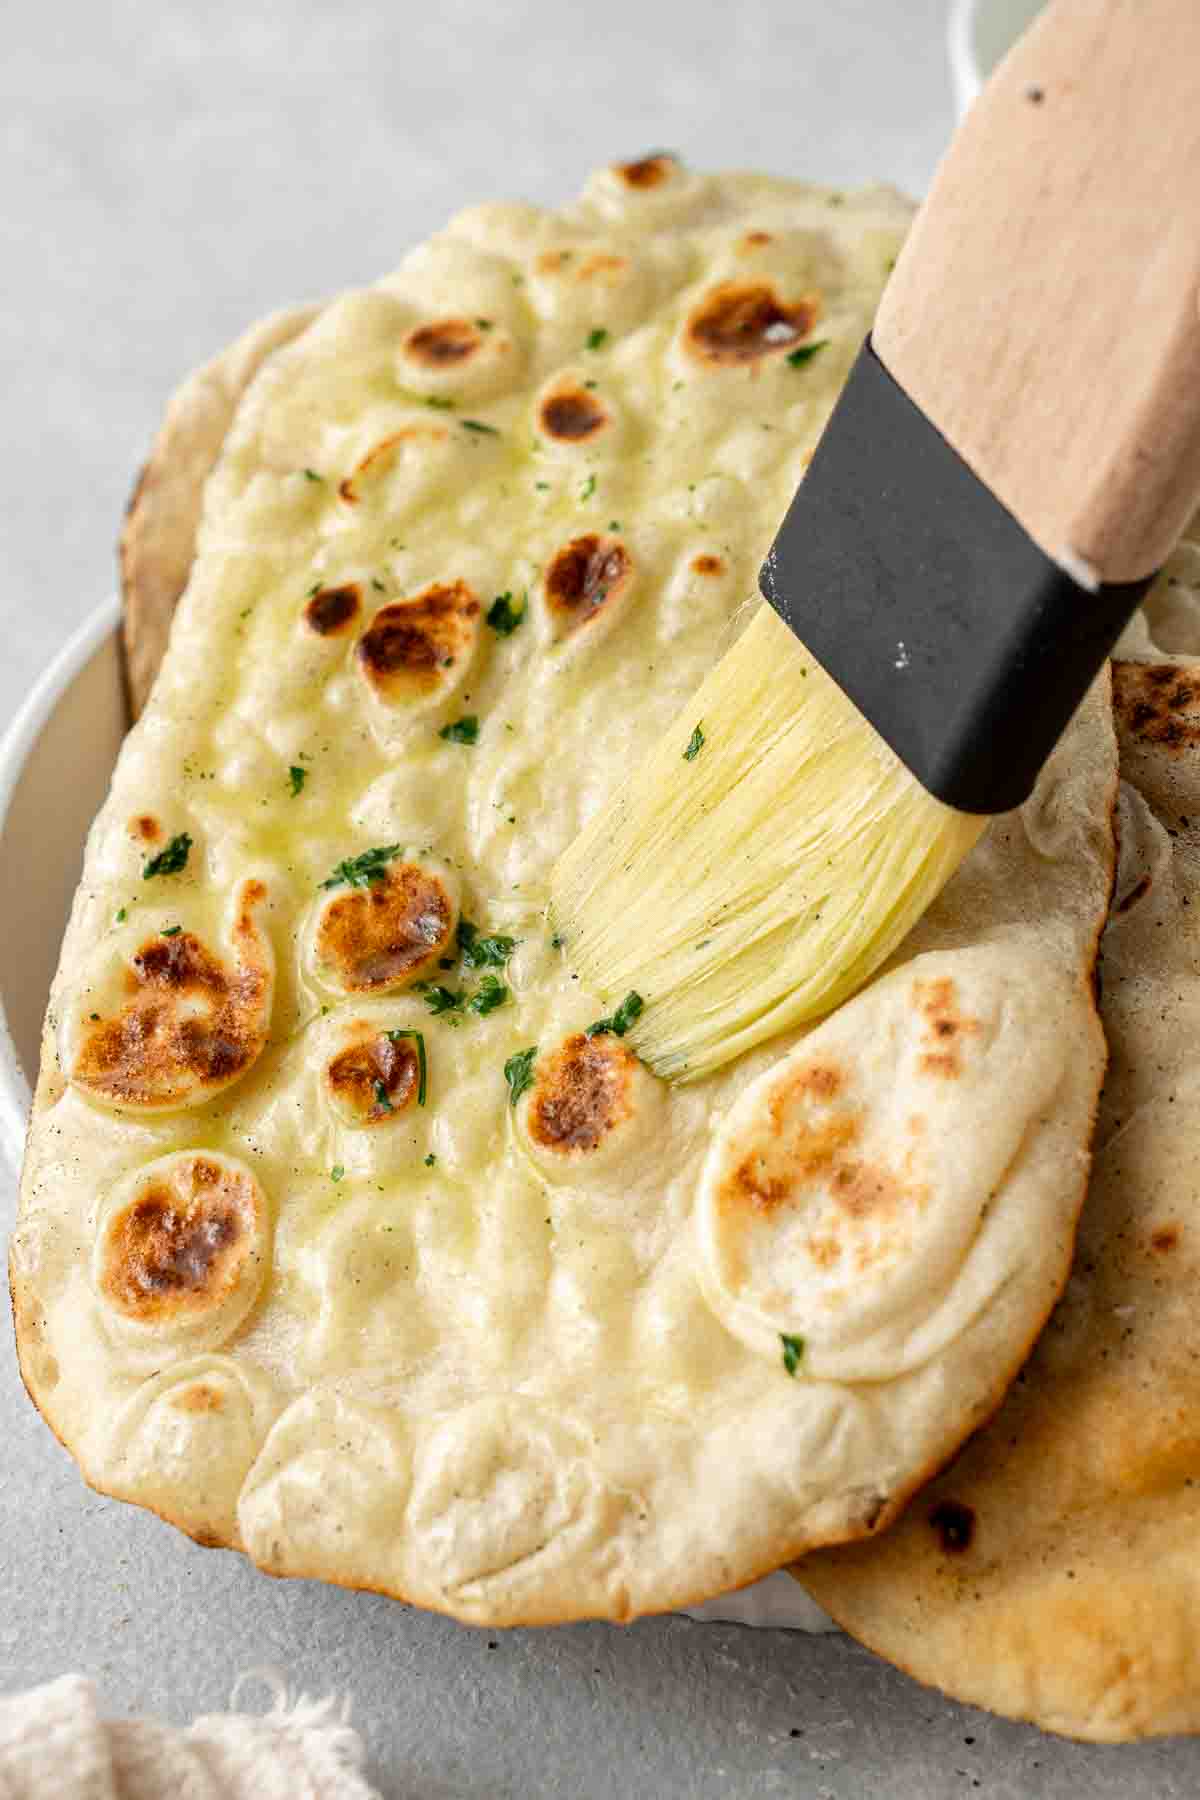 Pastry brush brushing garlic butter over freshly cooked naan.